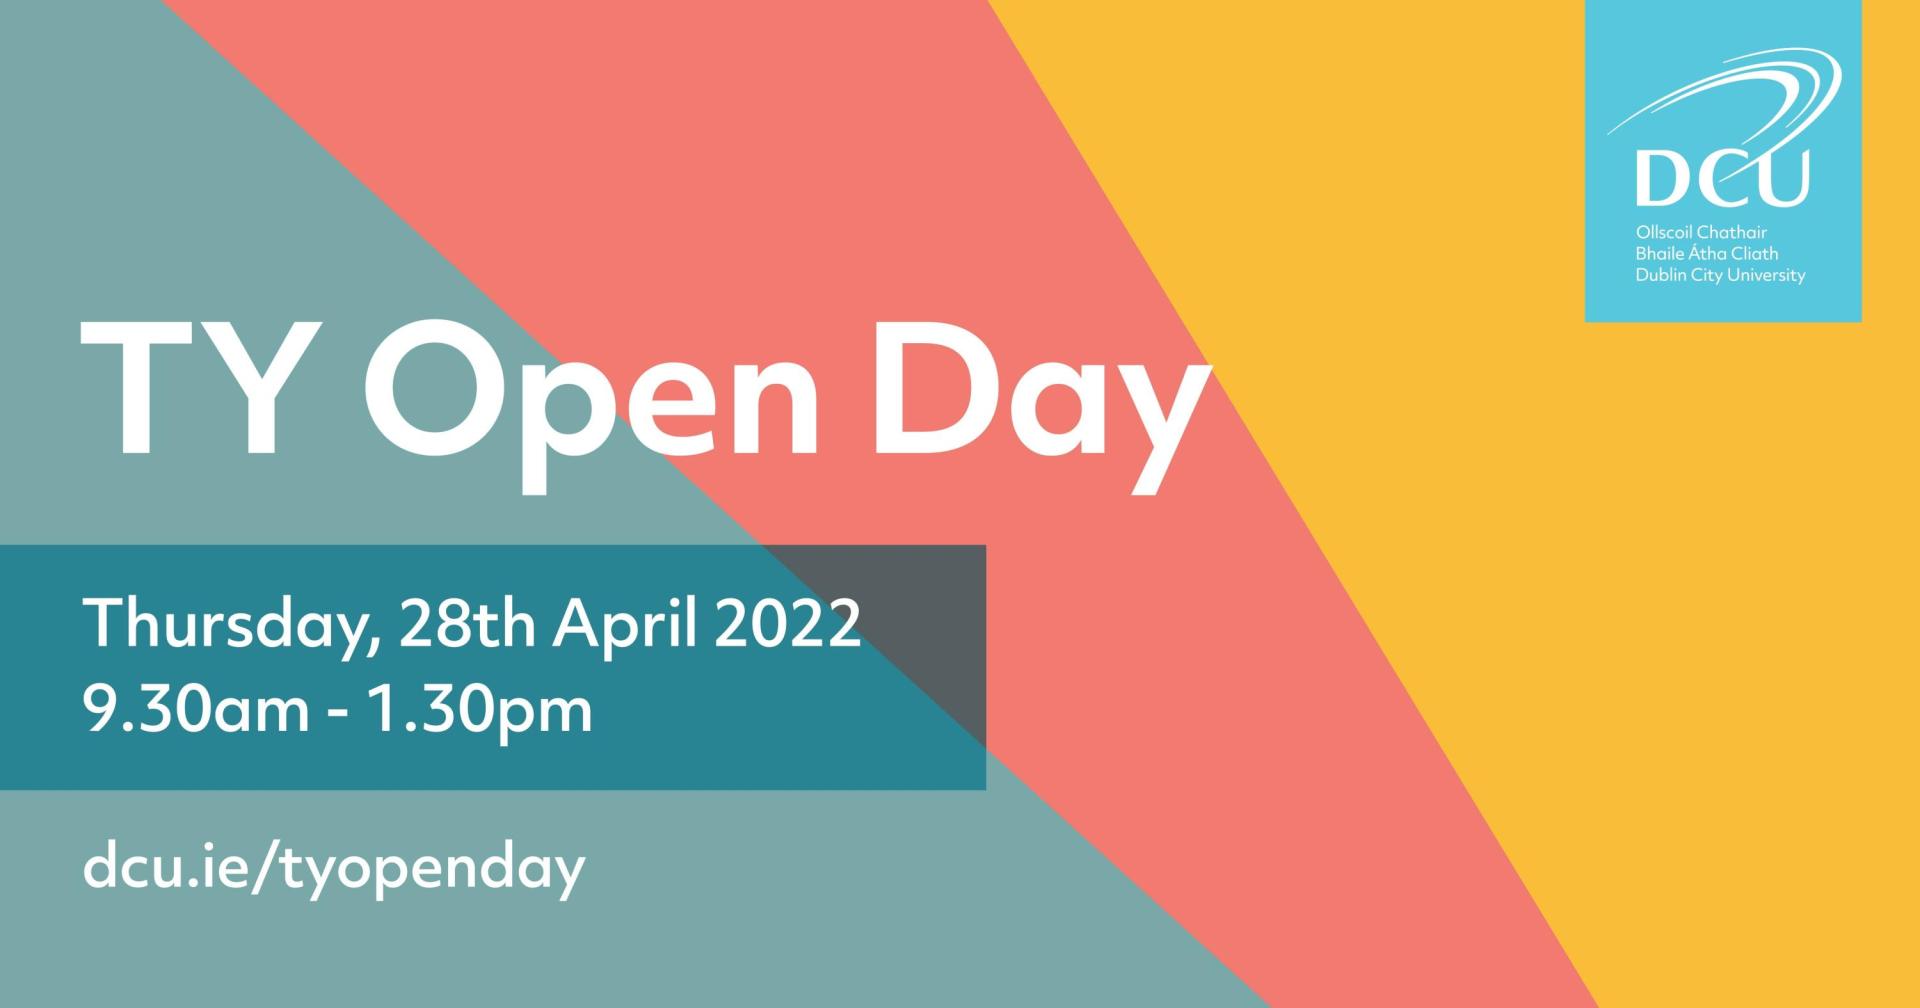 TY Open Day 2022